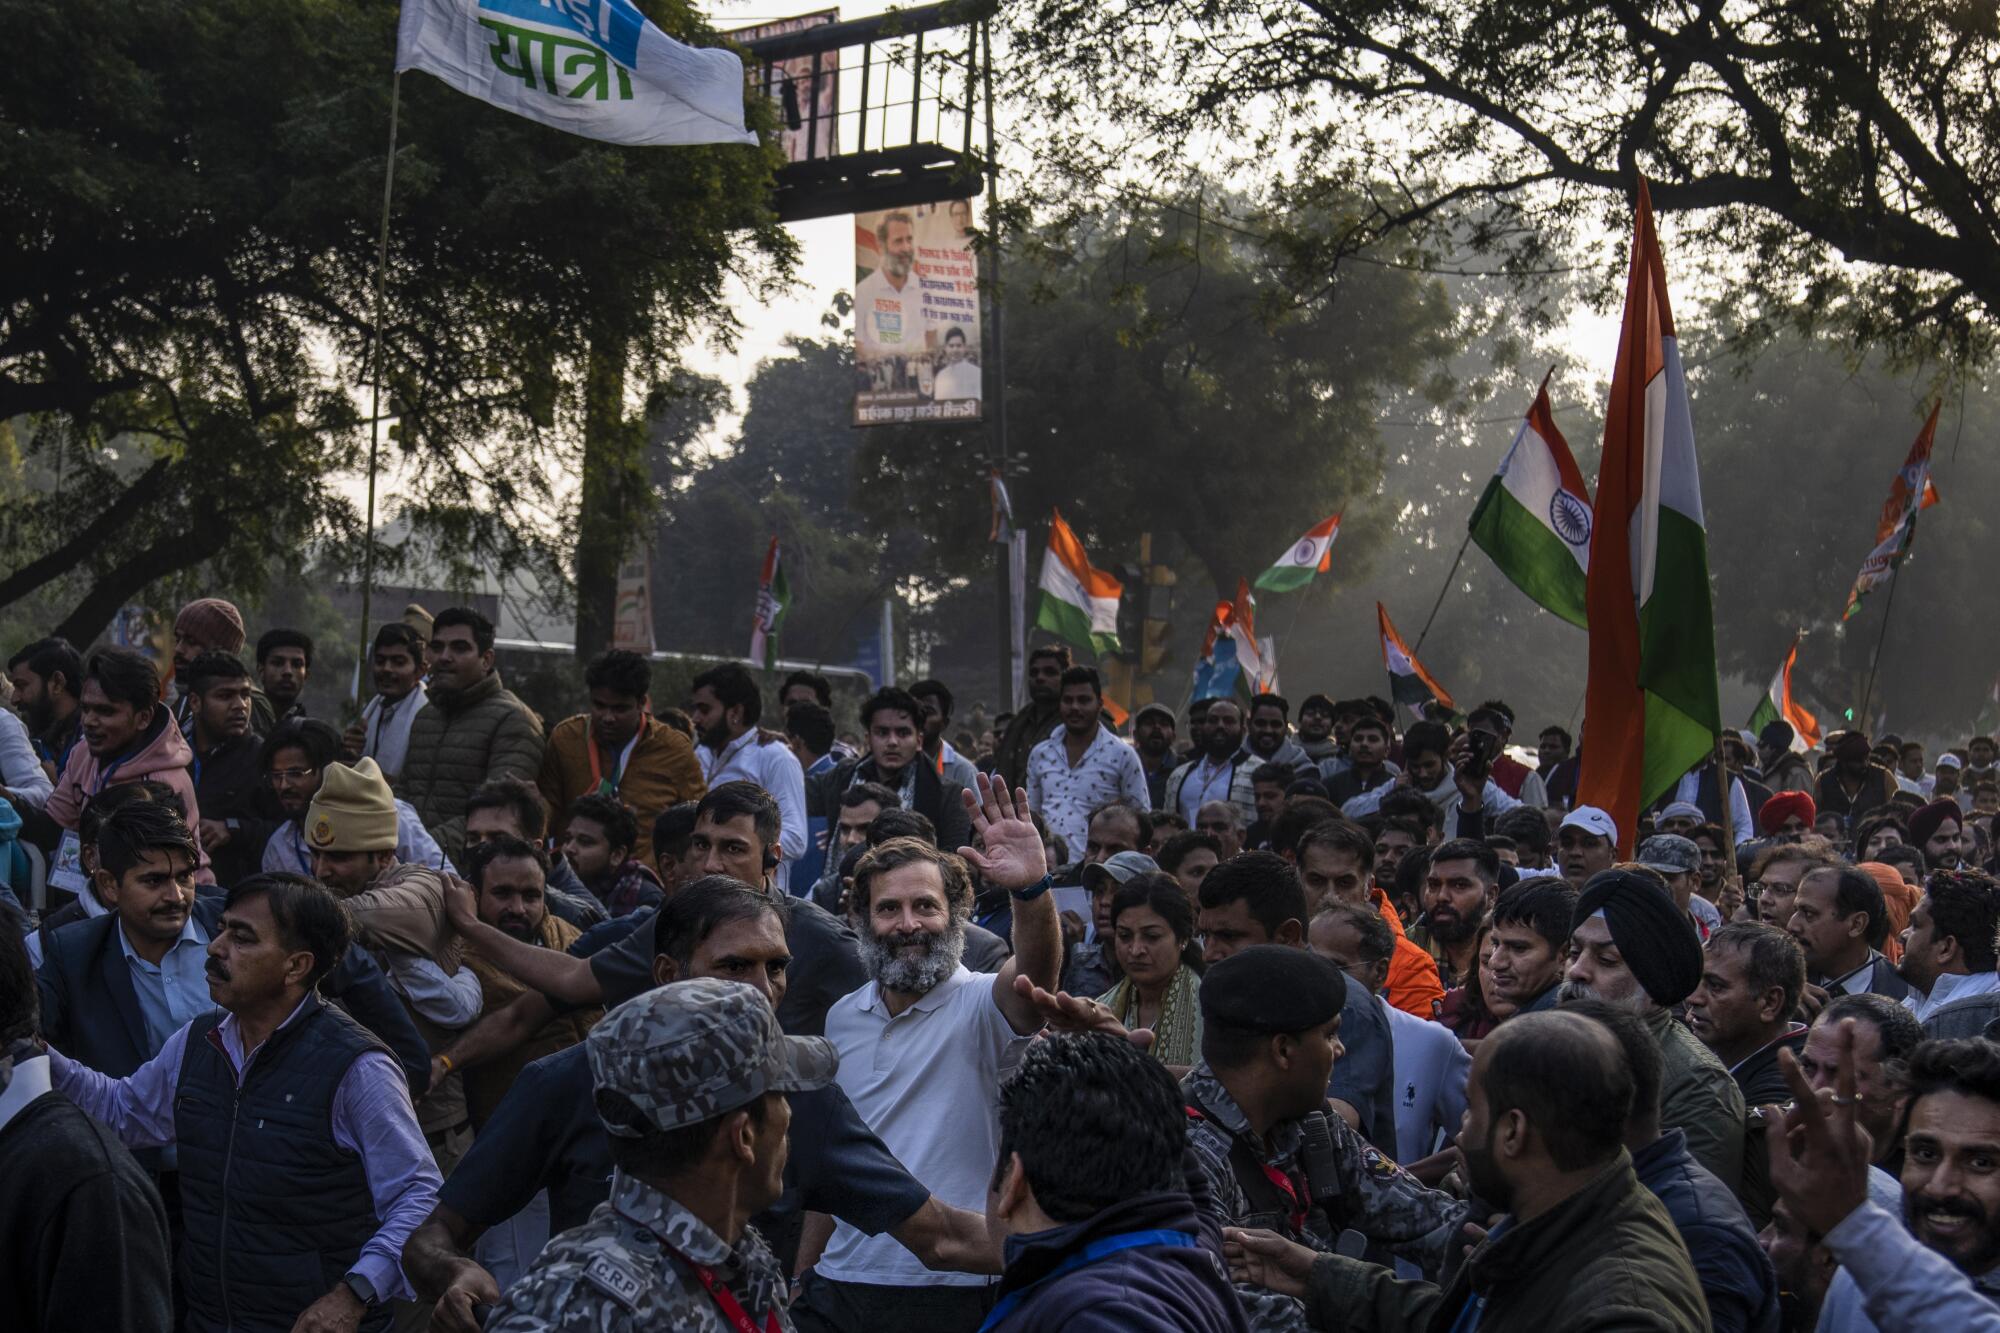 Rahul Gandhi waves to his supporters in New Delhi